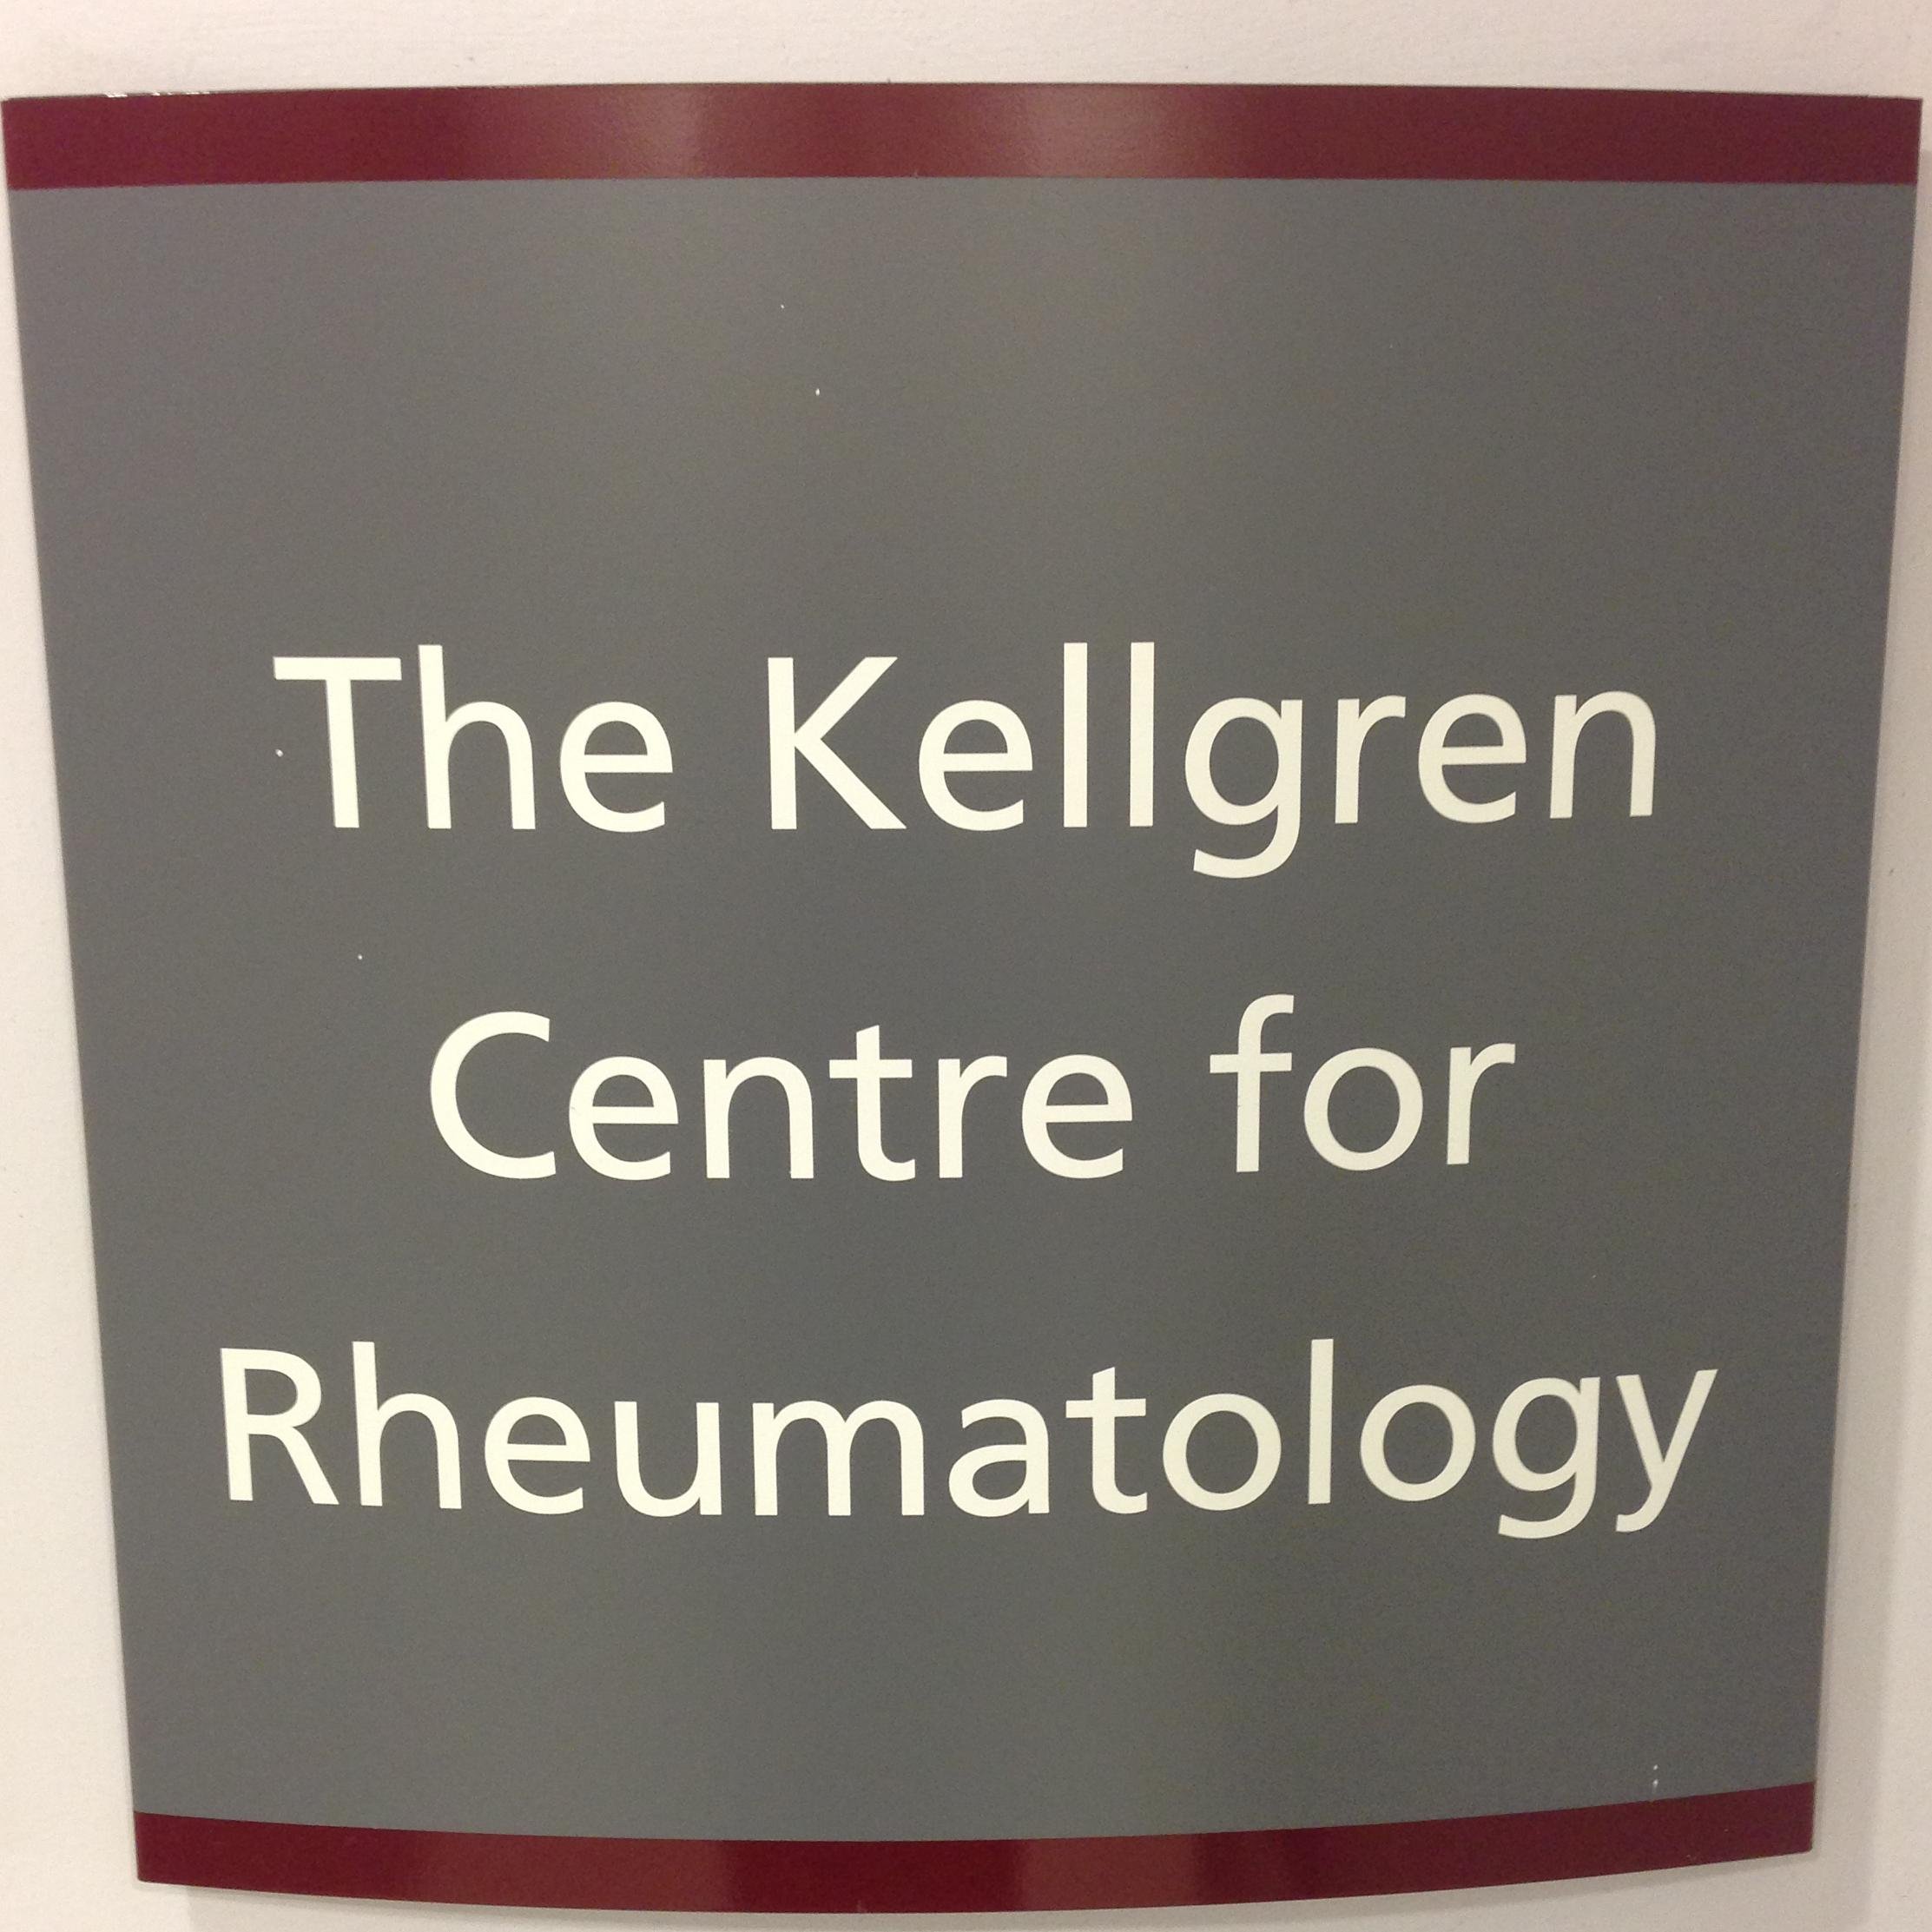 The Kellgren Centre for rheumatology at Manchester Royal Infirmary, MFT
A Lupus centre of excellence.
Please don't tweet for medical advice